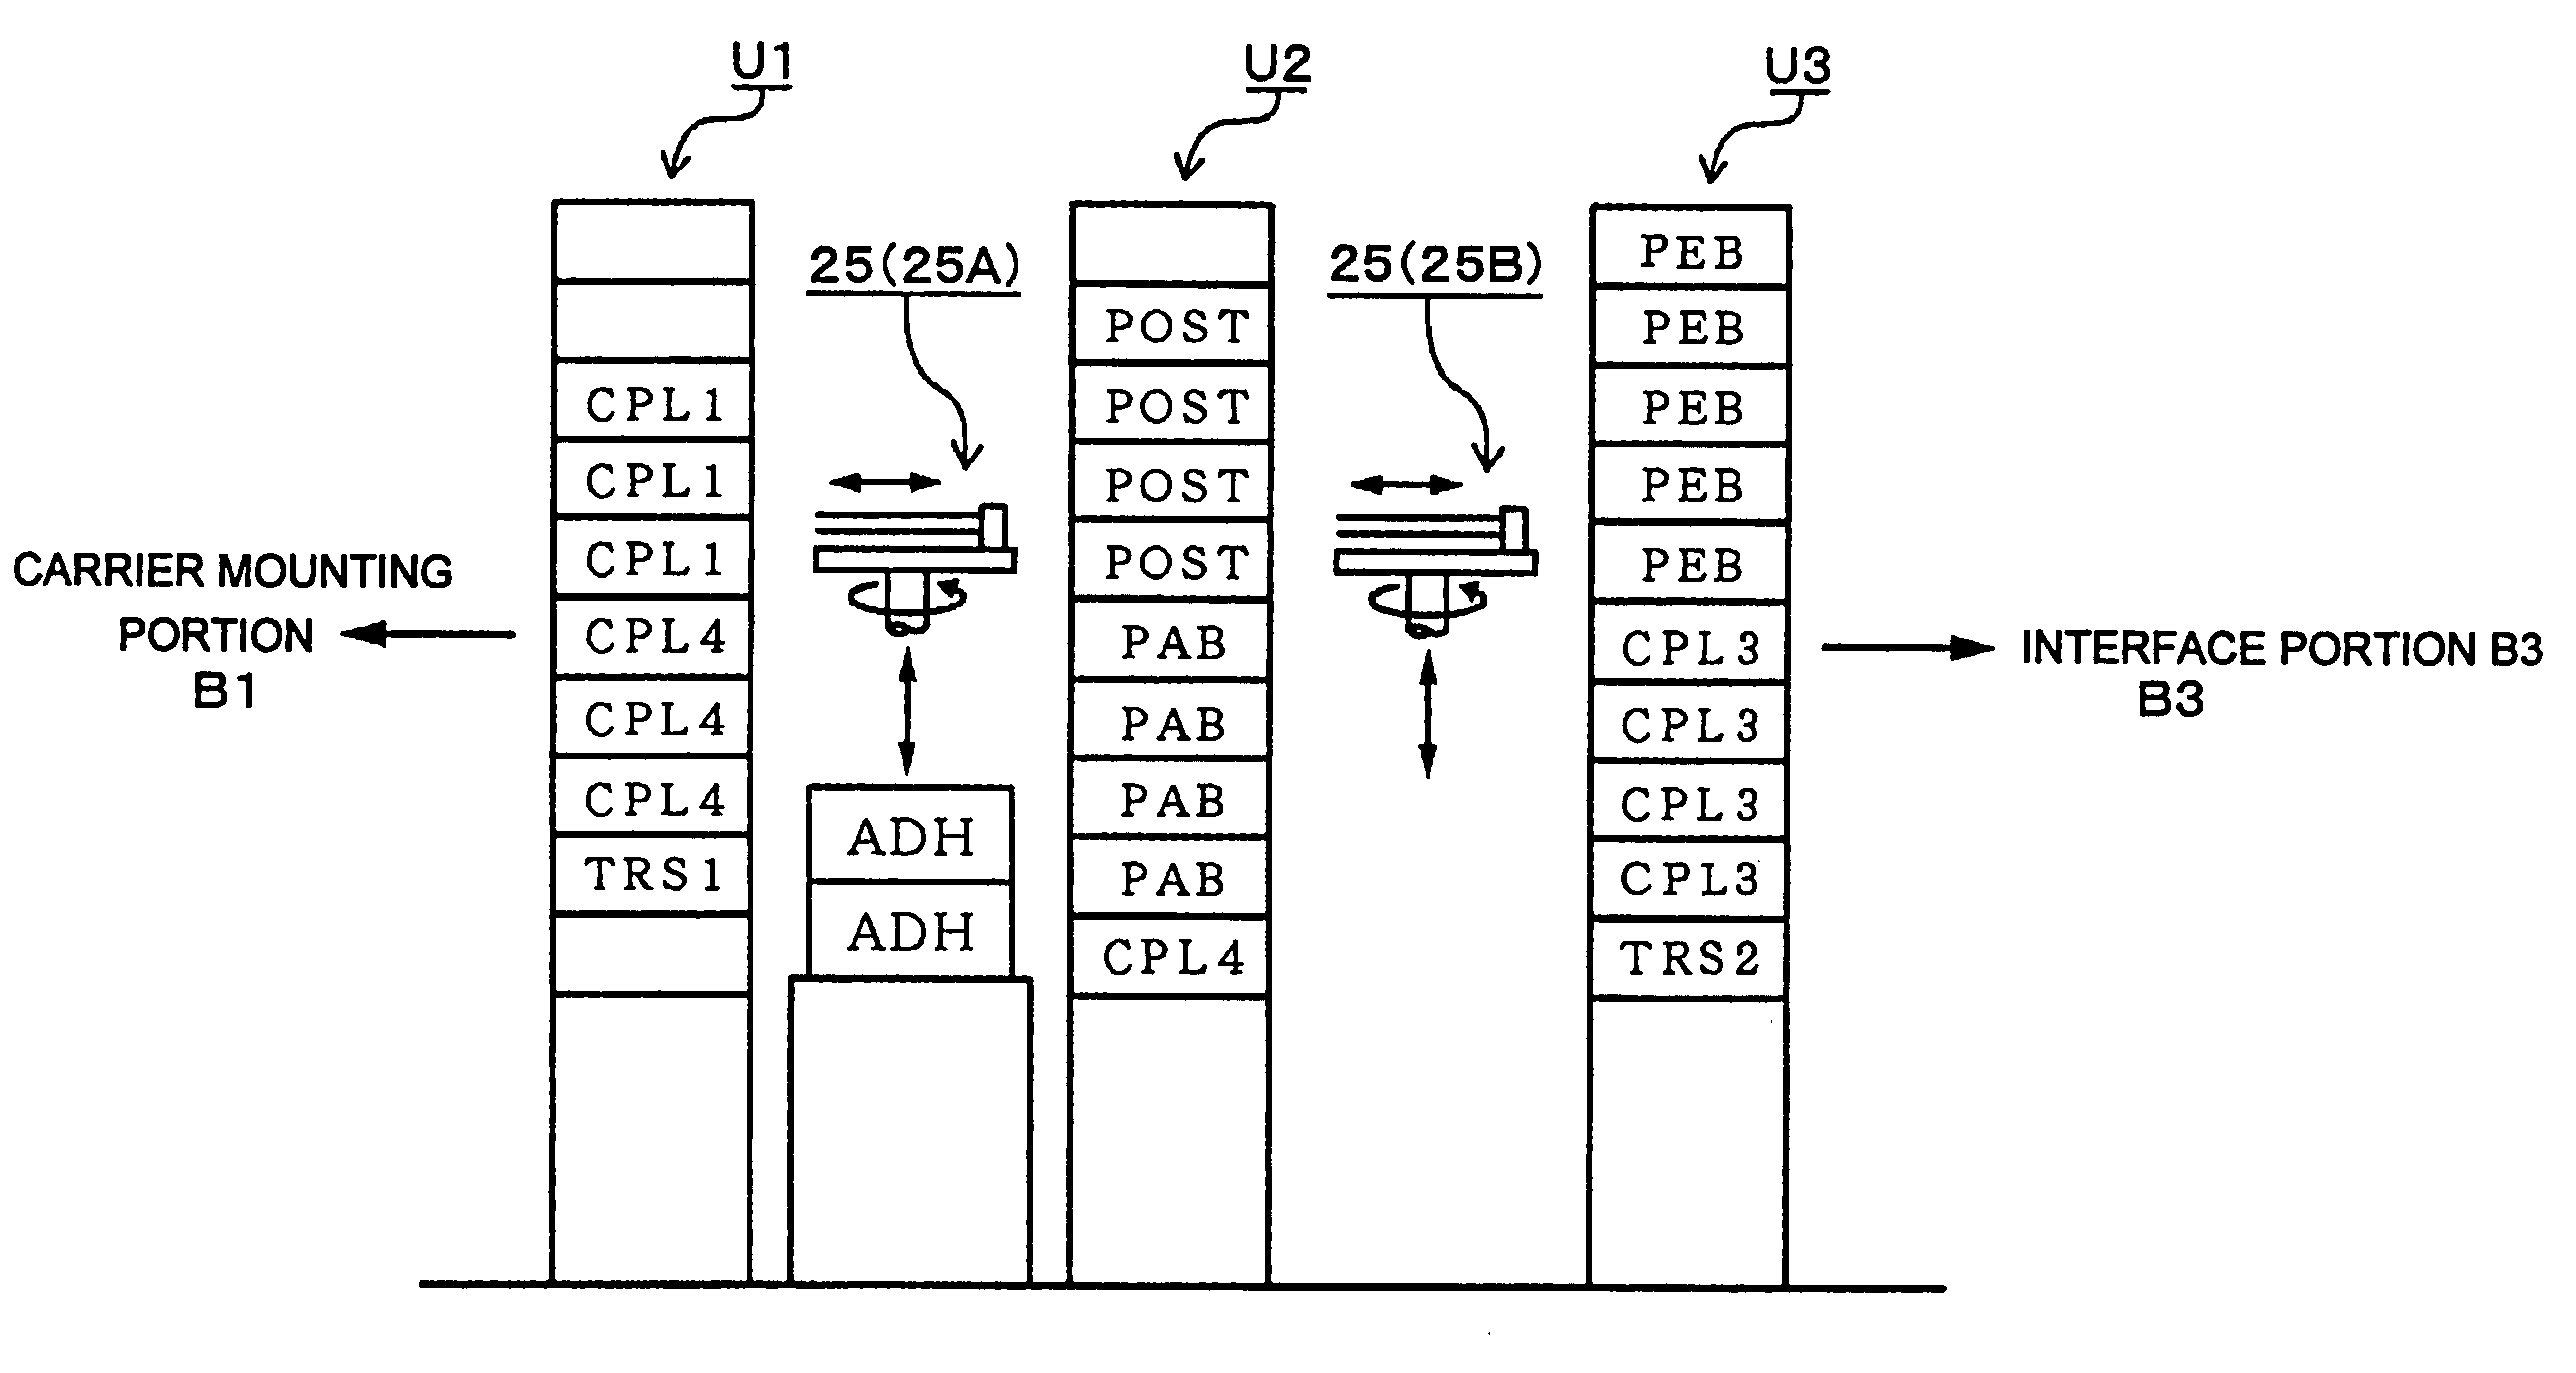 Wafer processing system, coating/developing apparatus, and wafer, processing apparatus